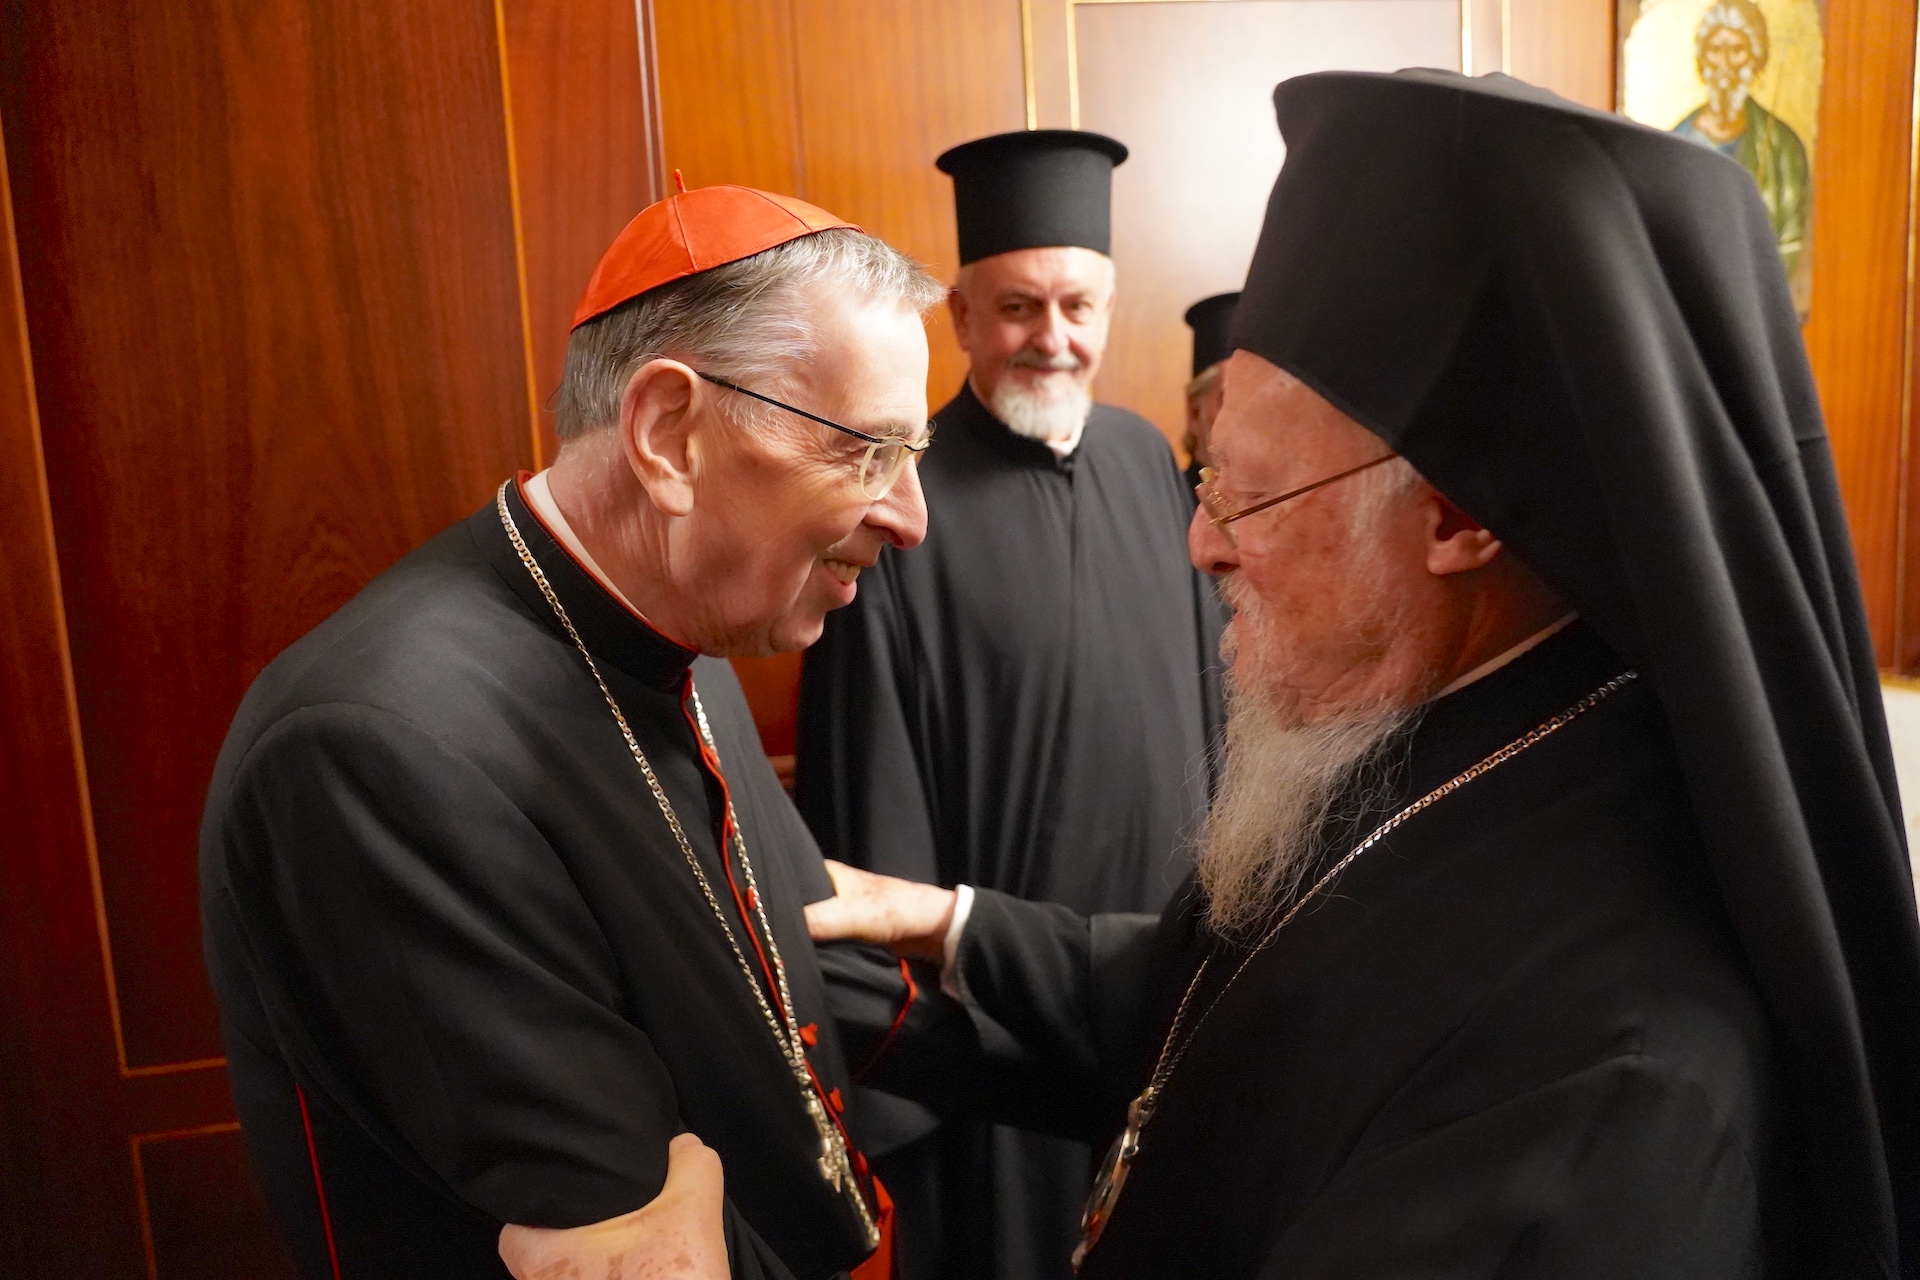 Official Delegation of the Church of Rome arrives at the Ecumenical Patriarchate